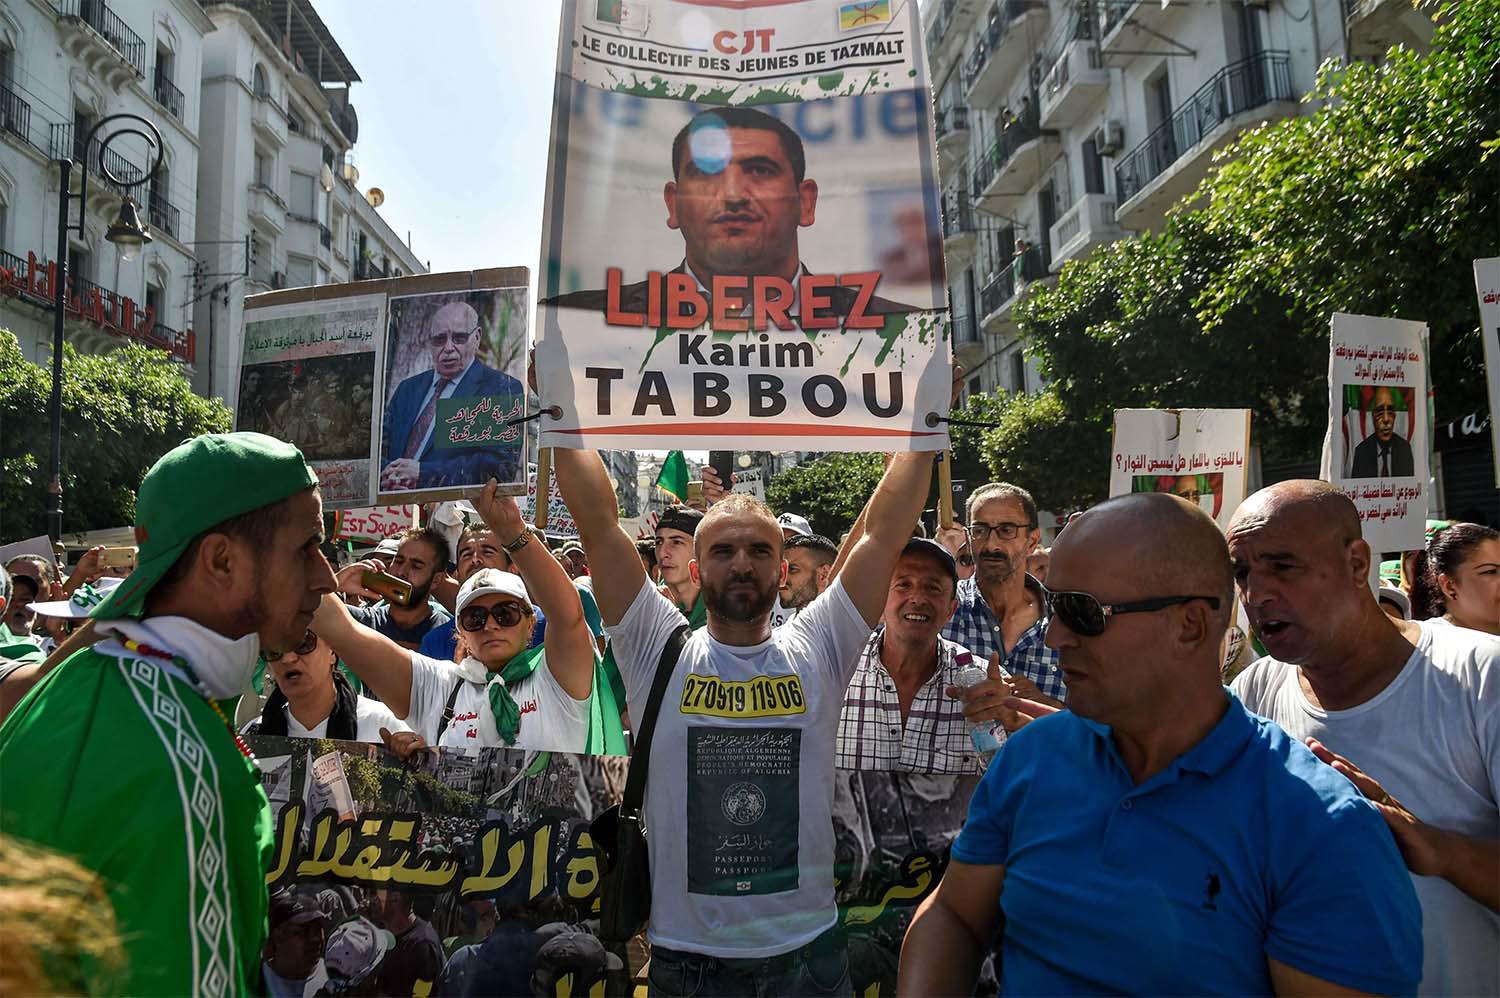 Algerian protester marches with a sign calling to set free politician Karim Tabbou during a protest last September